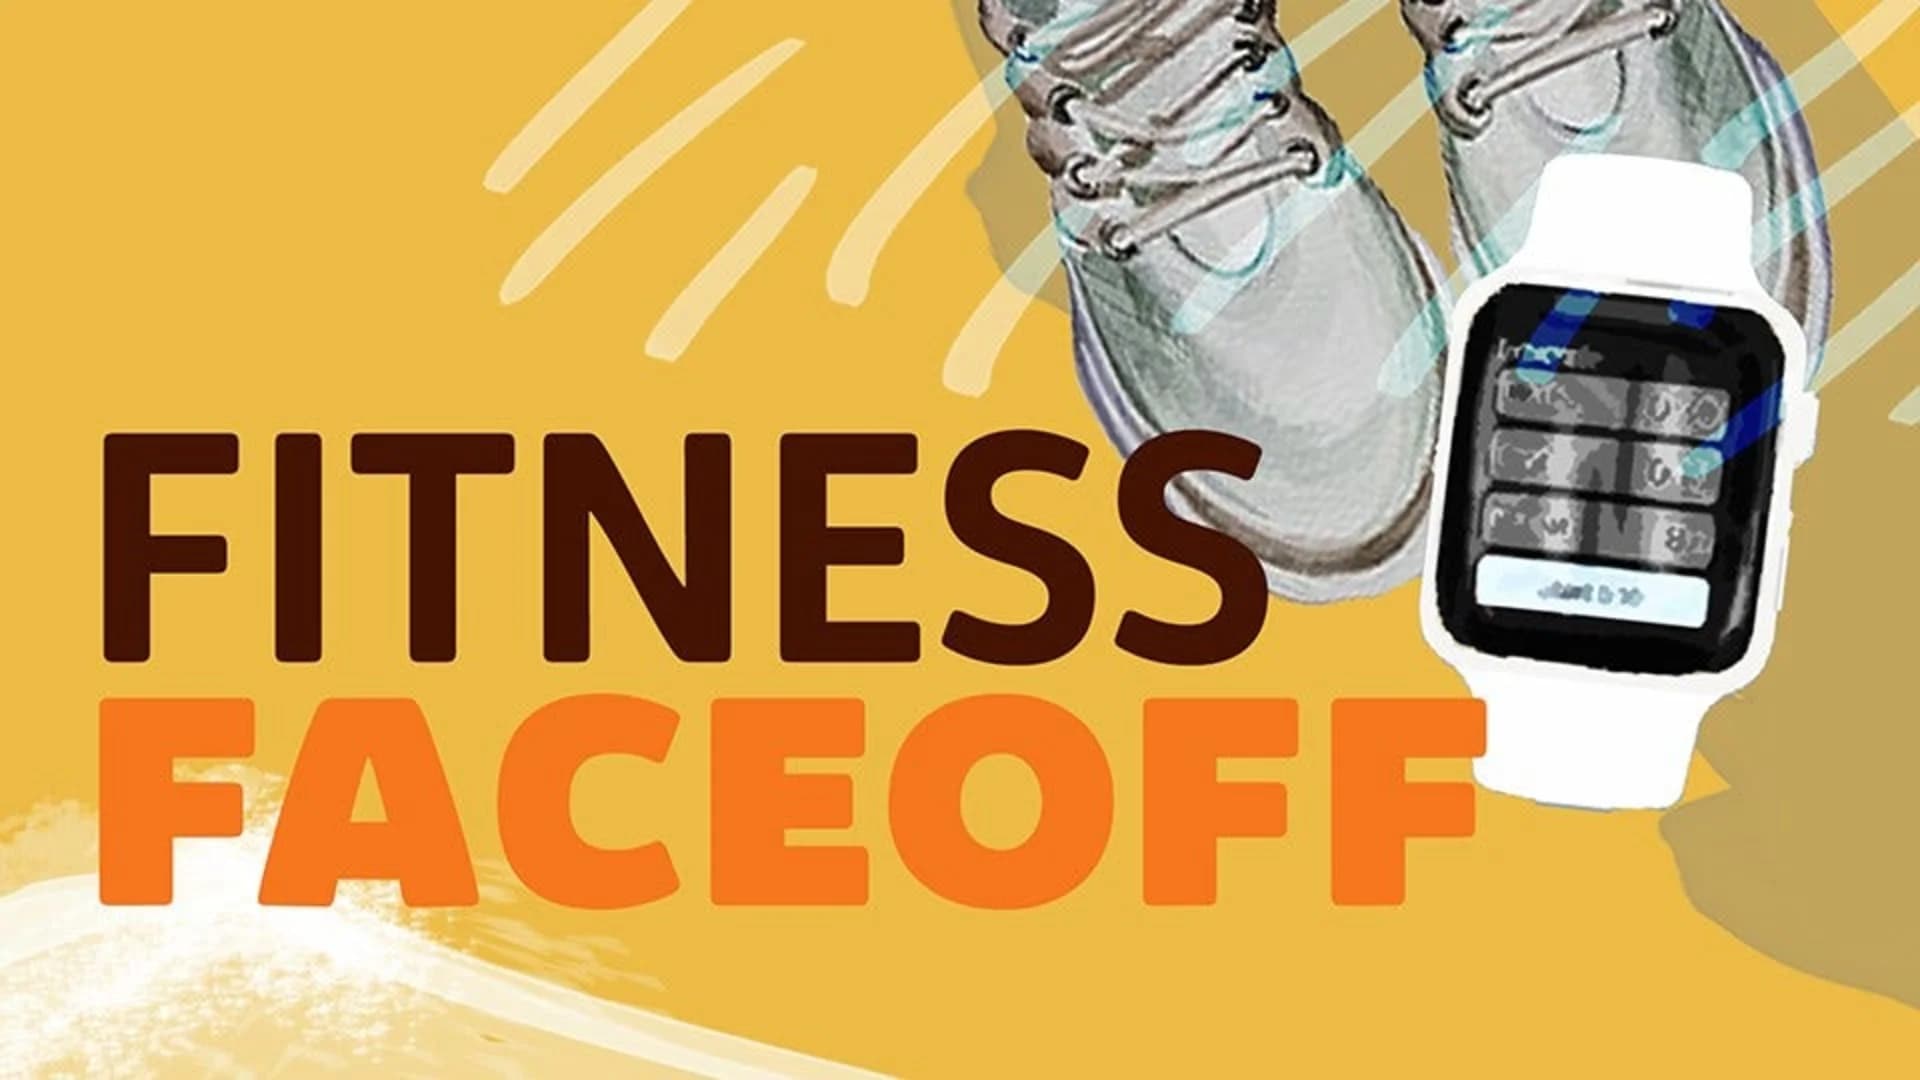 Fitness Face-off crosses the finish line in Connecticut